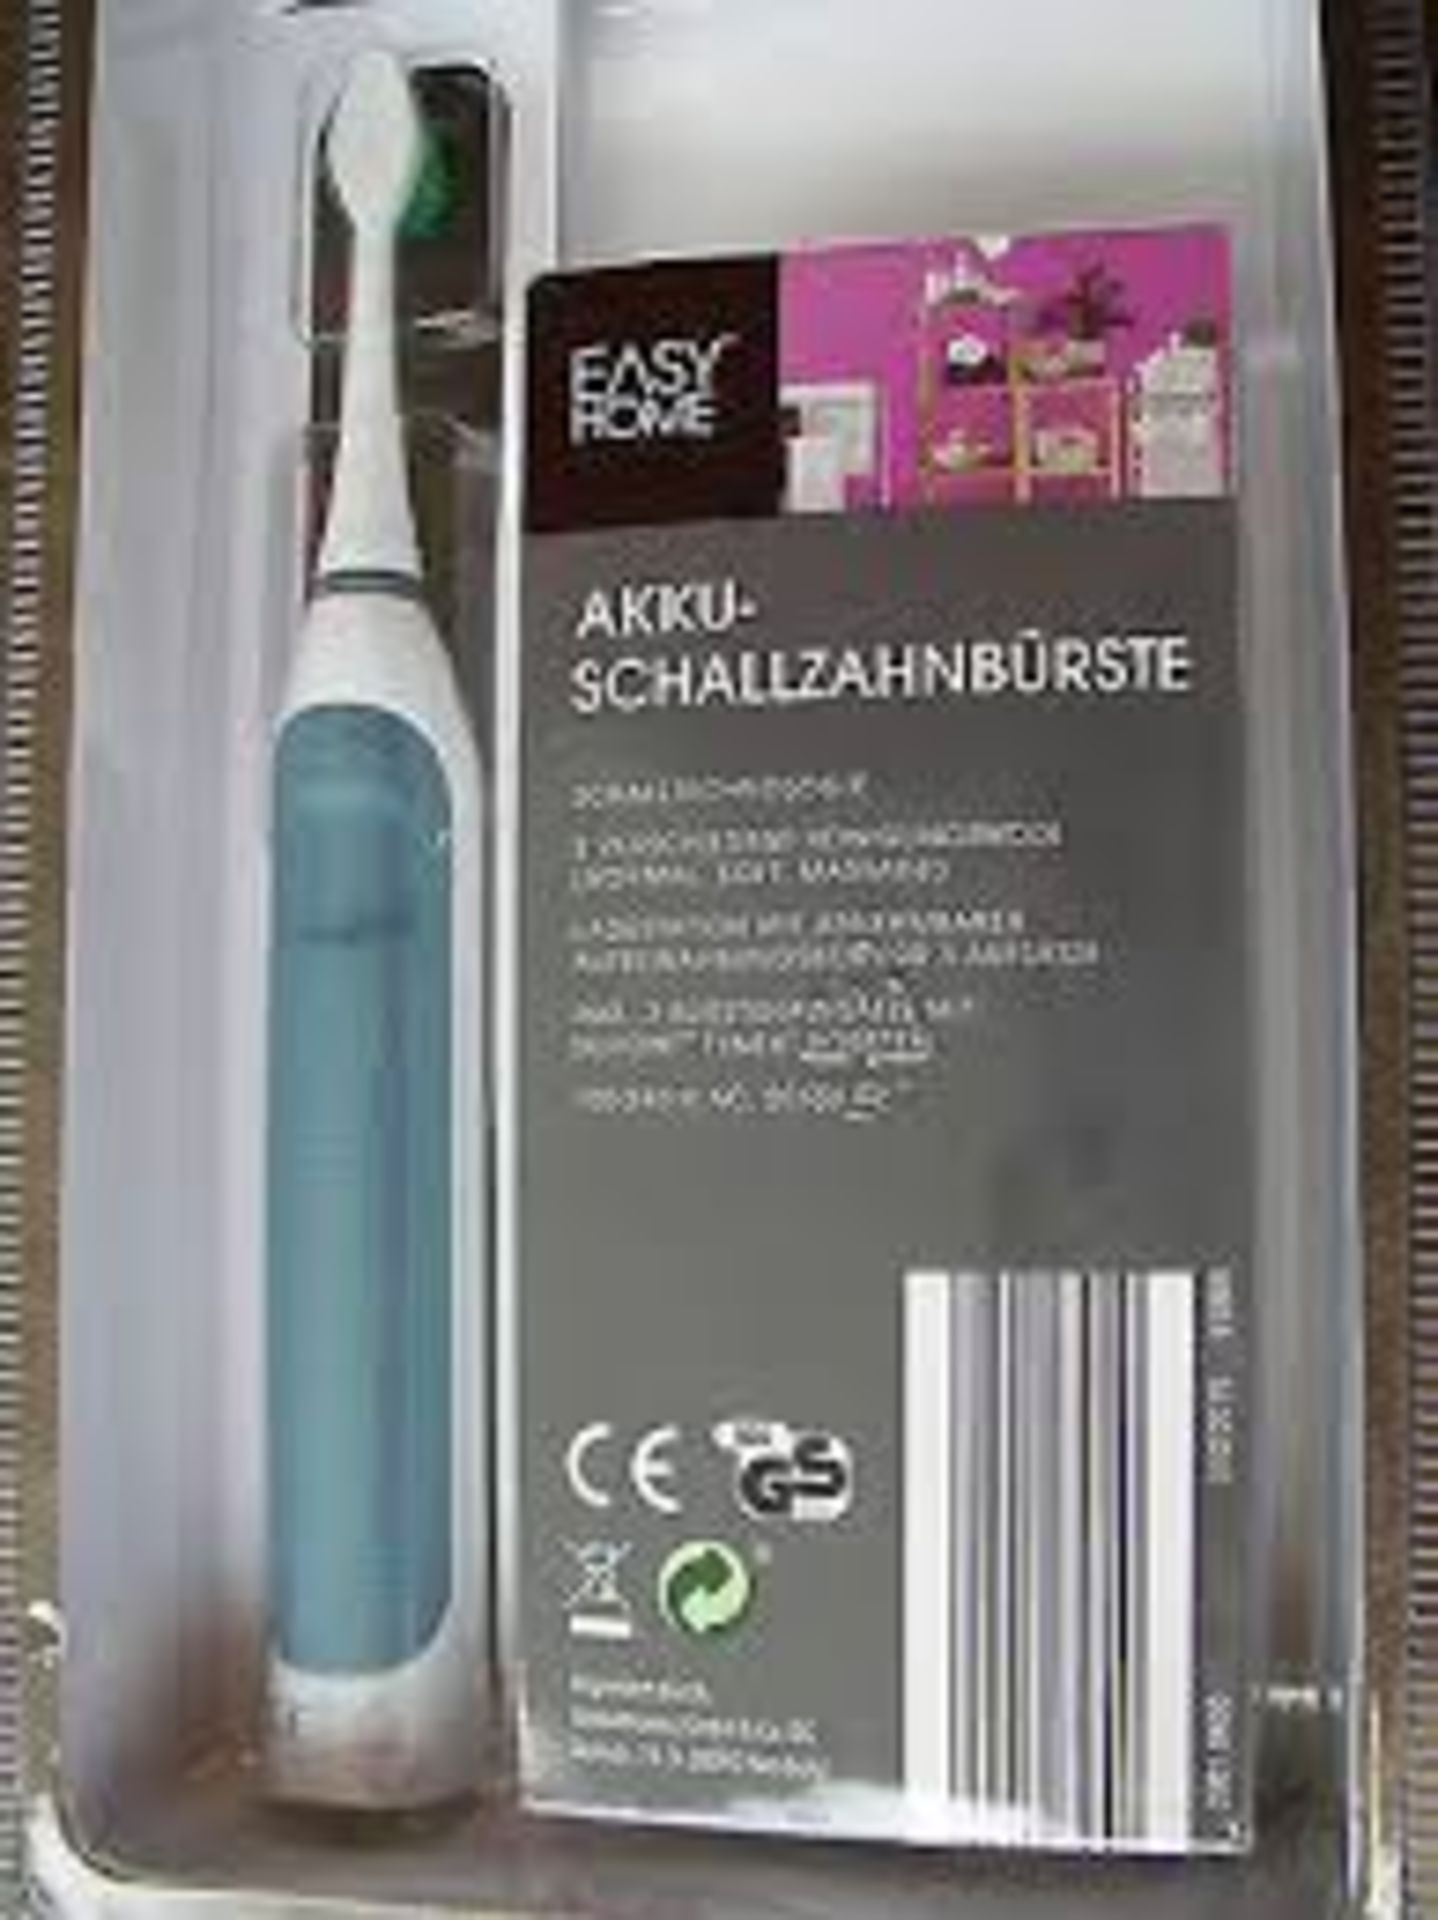 V *TRADE QTY* Brand New Sonic Electric Toothbrush-3 Different Cleaning Modes-Charge Control - Image 2 of 2